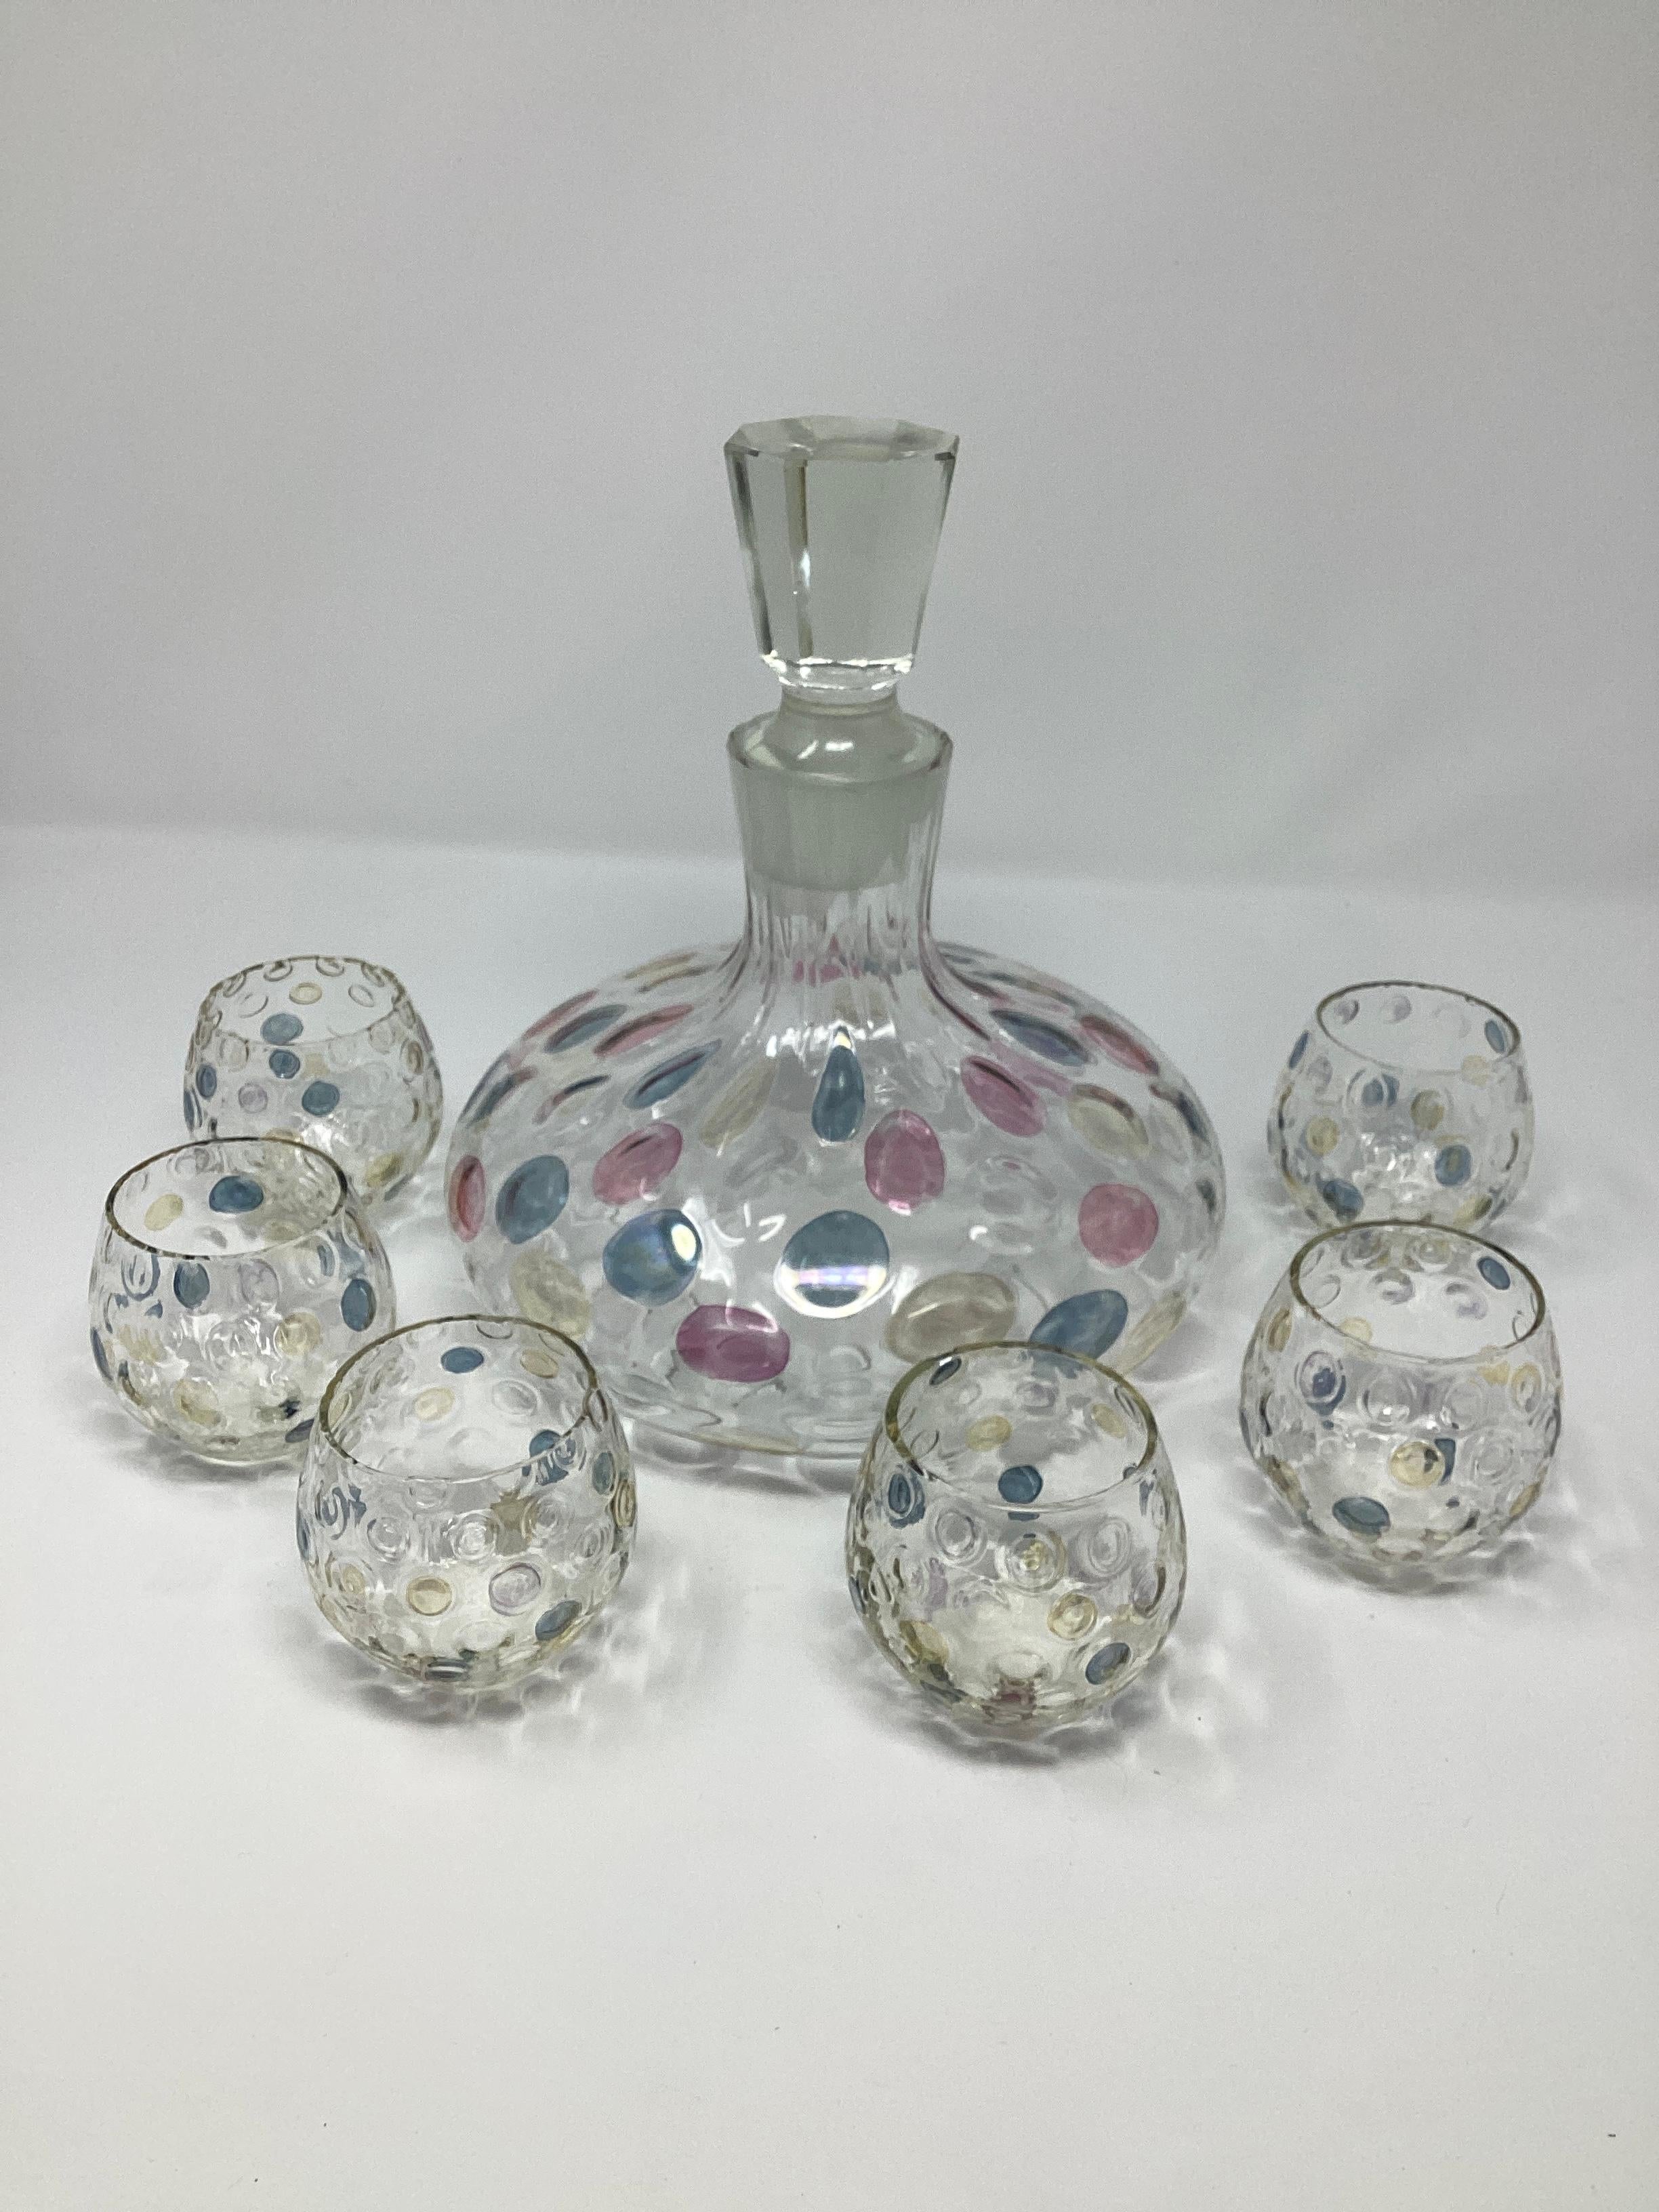 Mid Century Decanter Set consisting of a decanter and 6 small roll poly glasses.
